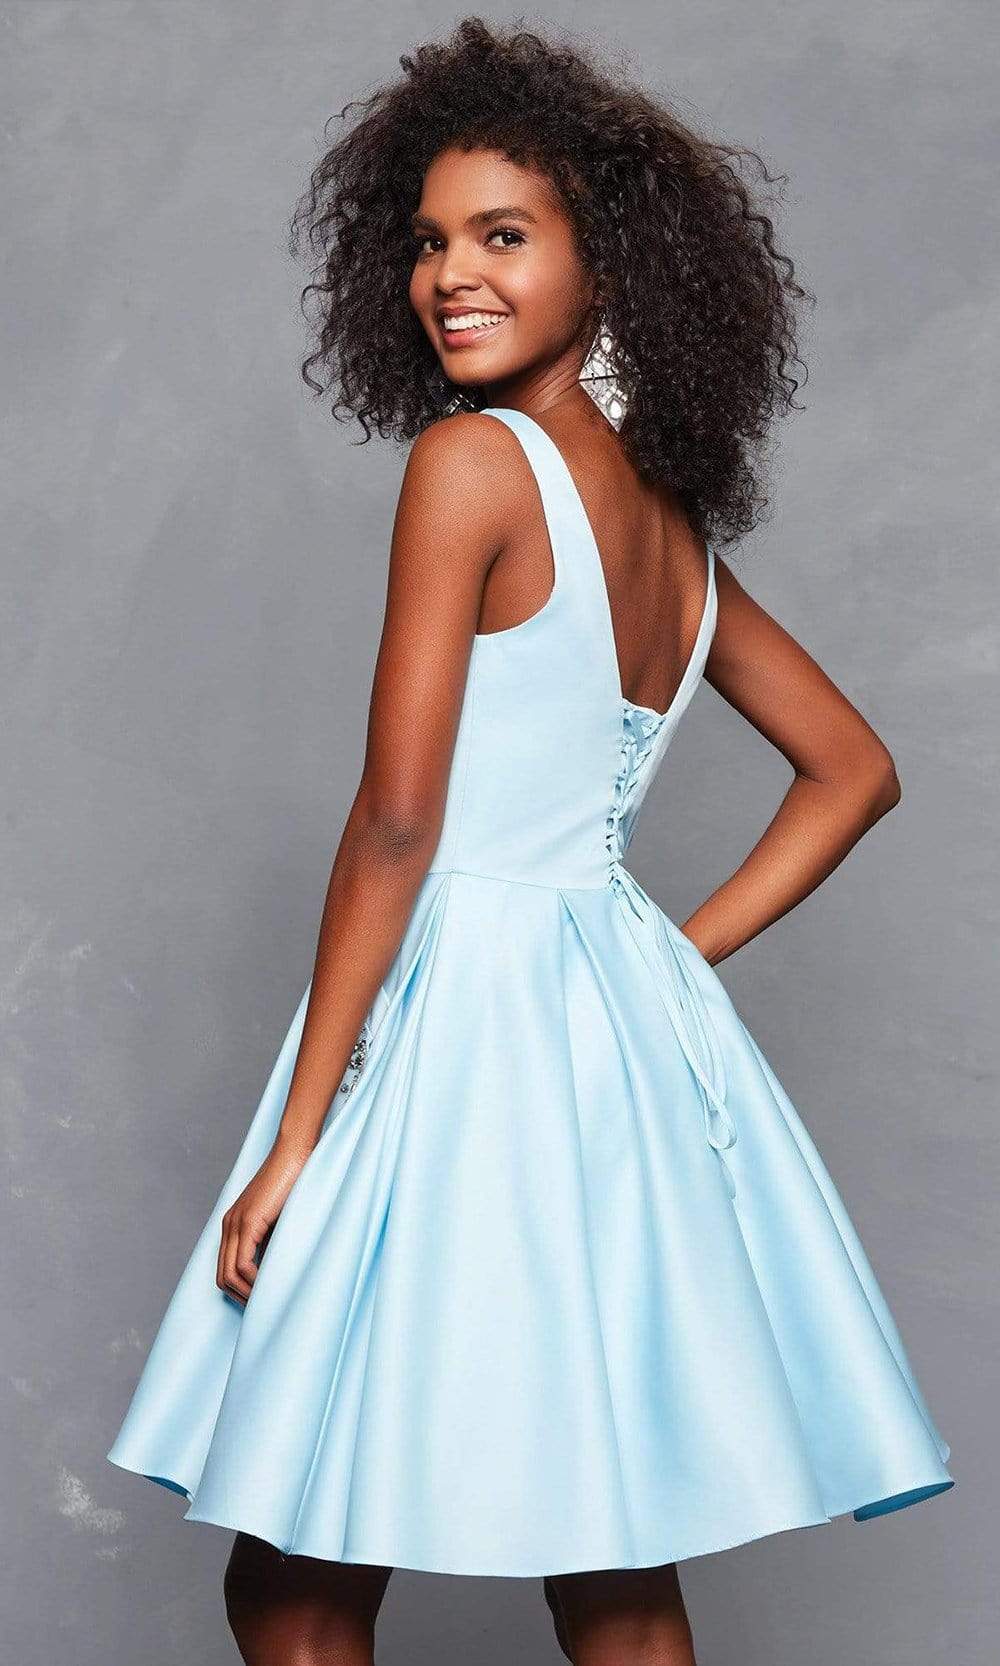 Image of Clarisse - 3613 Illusion Plunging V Neckline Fit and Flare Short Dress